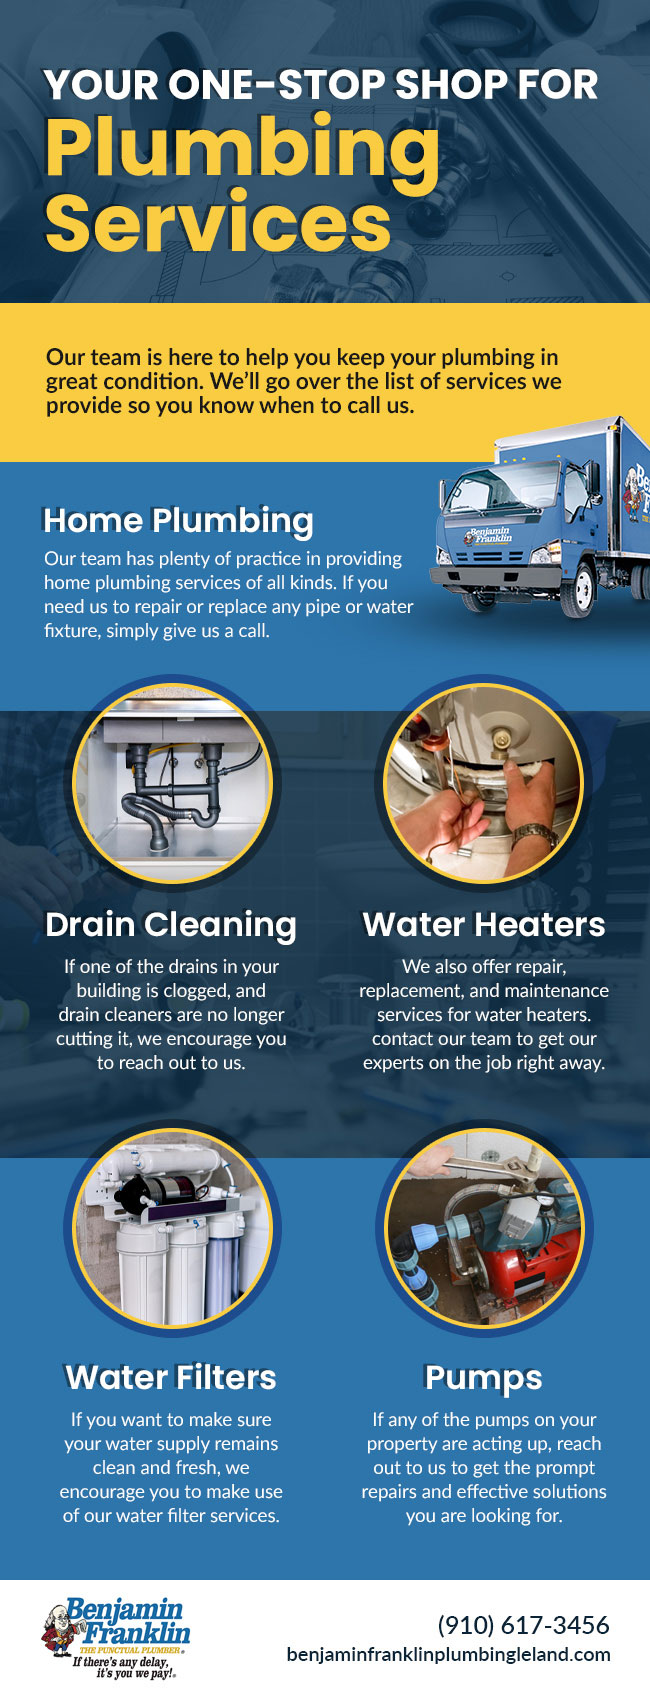 We are Your Go-To Provider for All Plumbing Services